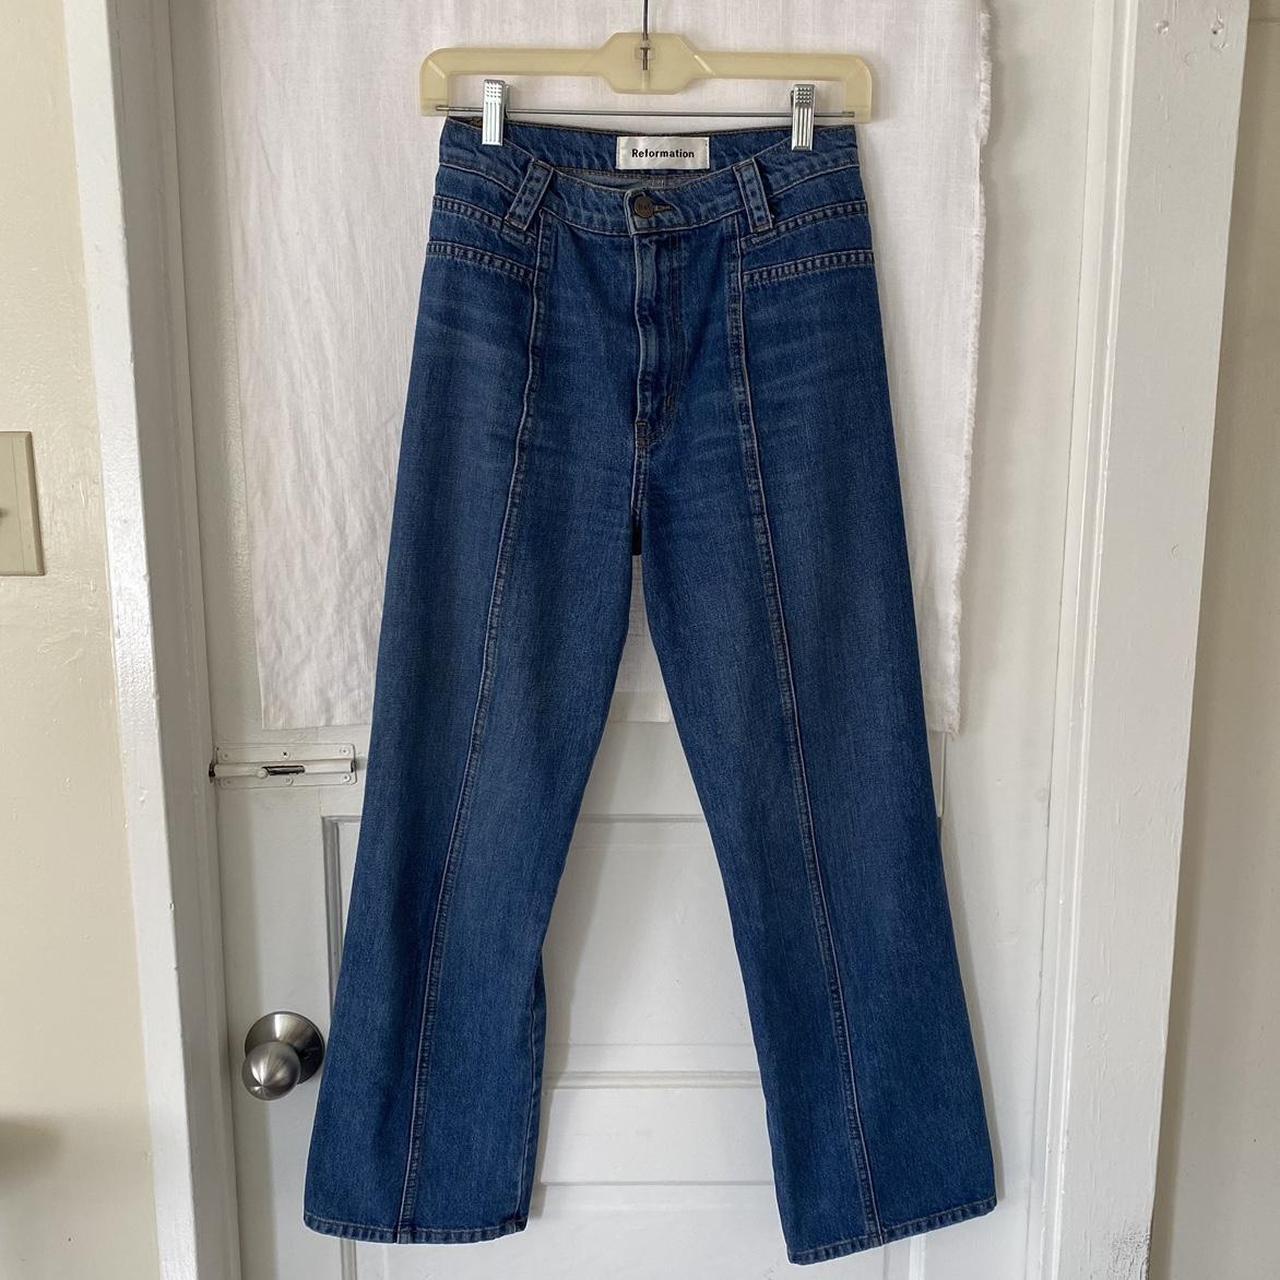 Reformations seamed jeans. So flattering and cute! - Depop